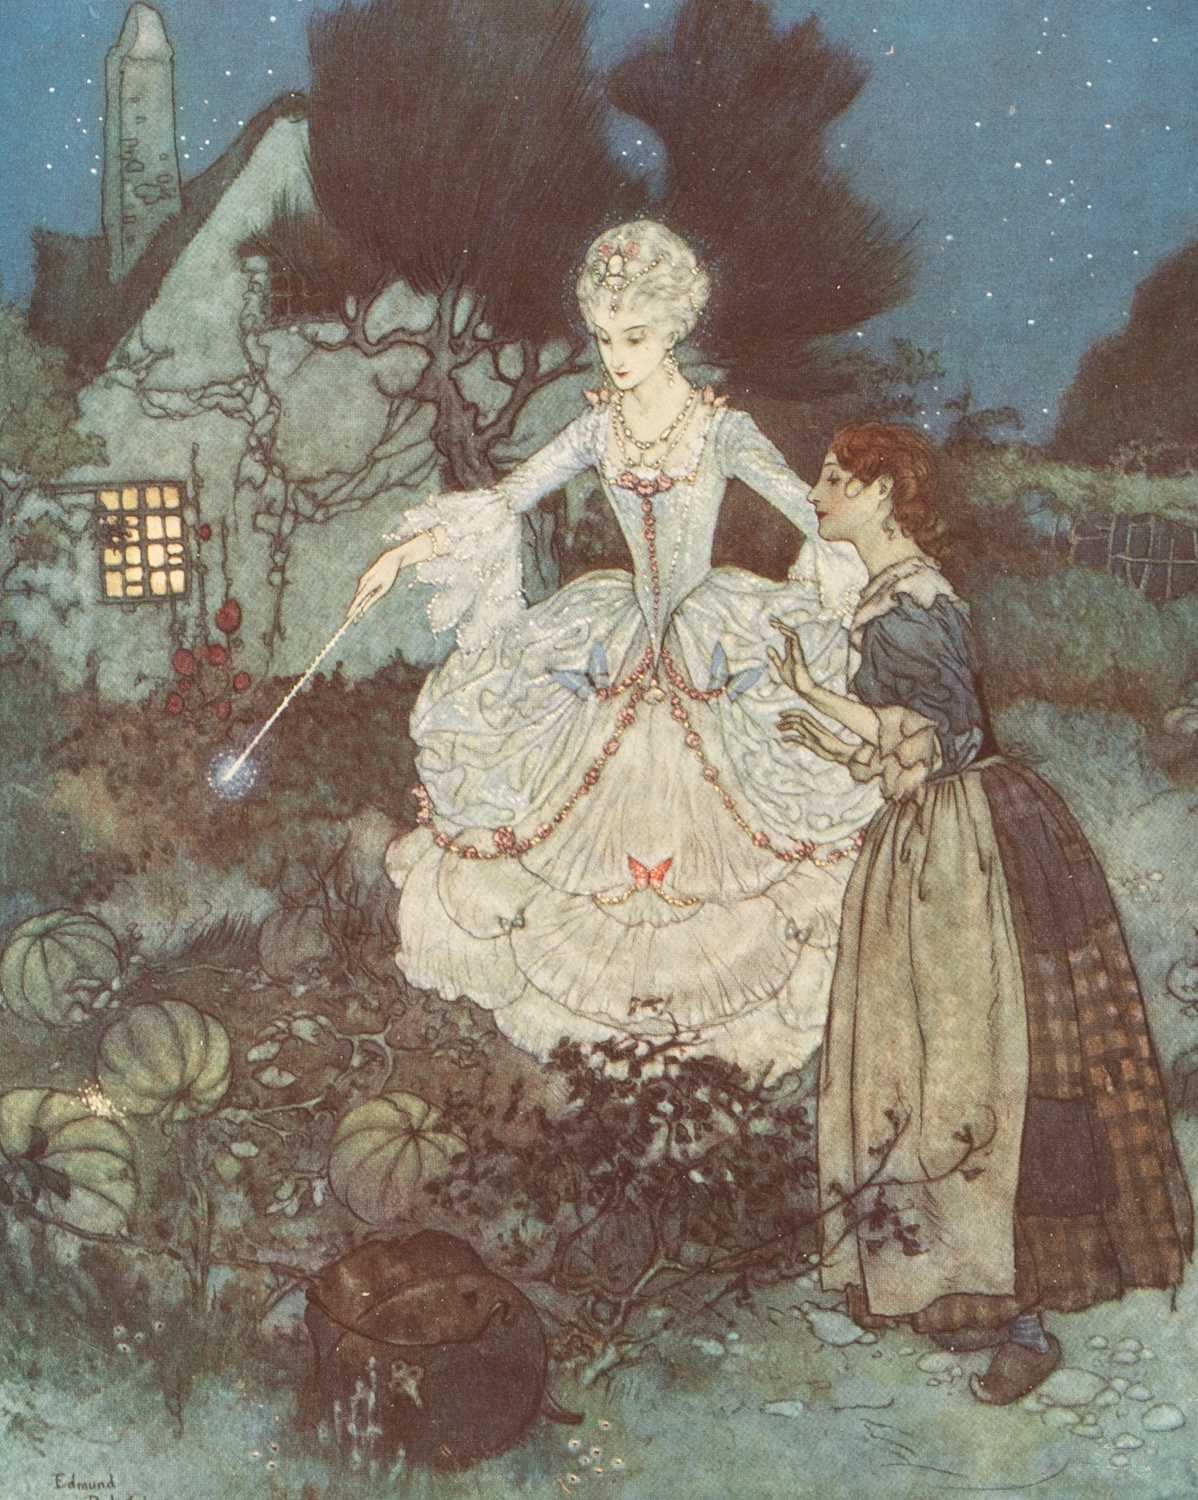 Quiller-Couch (Sir Arthur) The Sleeping Beauty and other fairy tales - Image 35 of 37